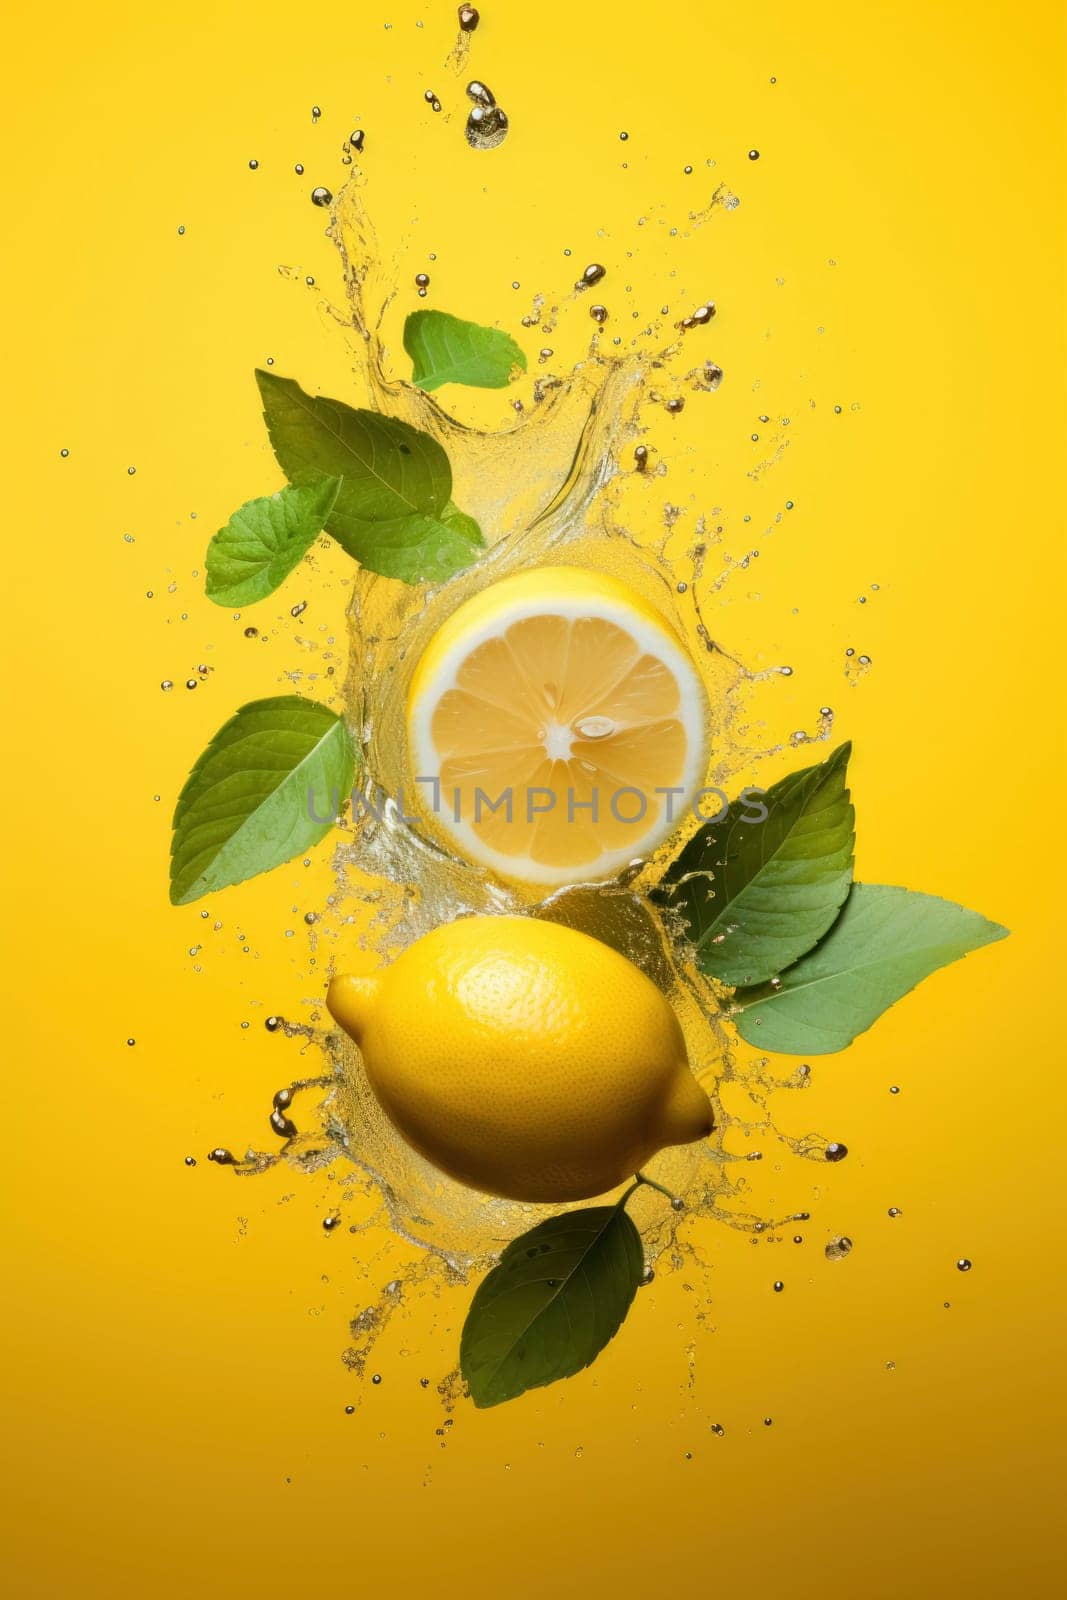 Lemon and Mint in Water Splash on Yellow by andreyz